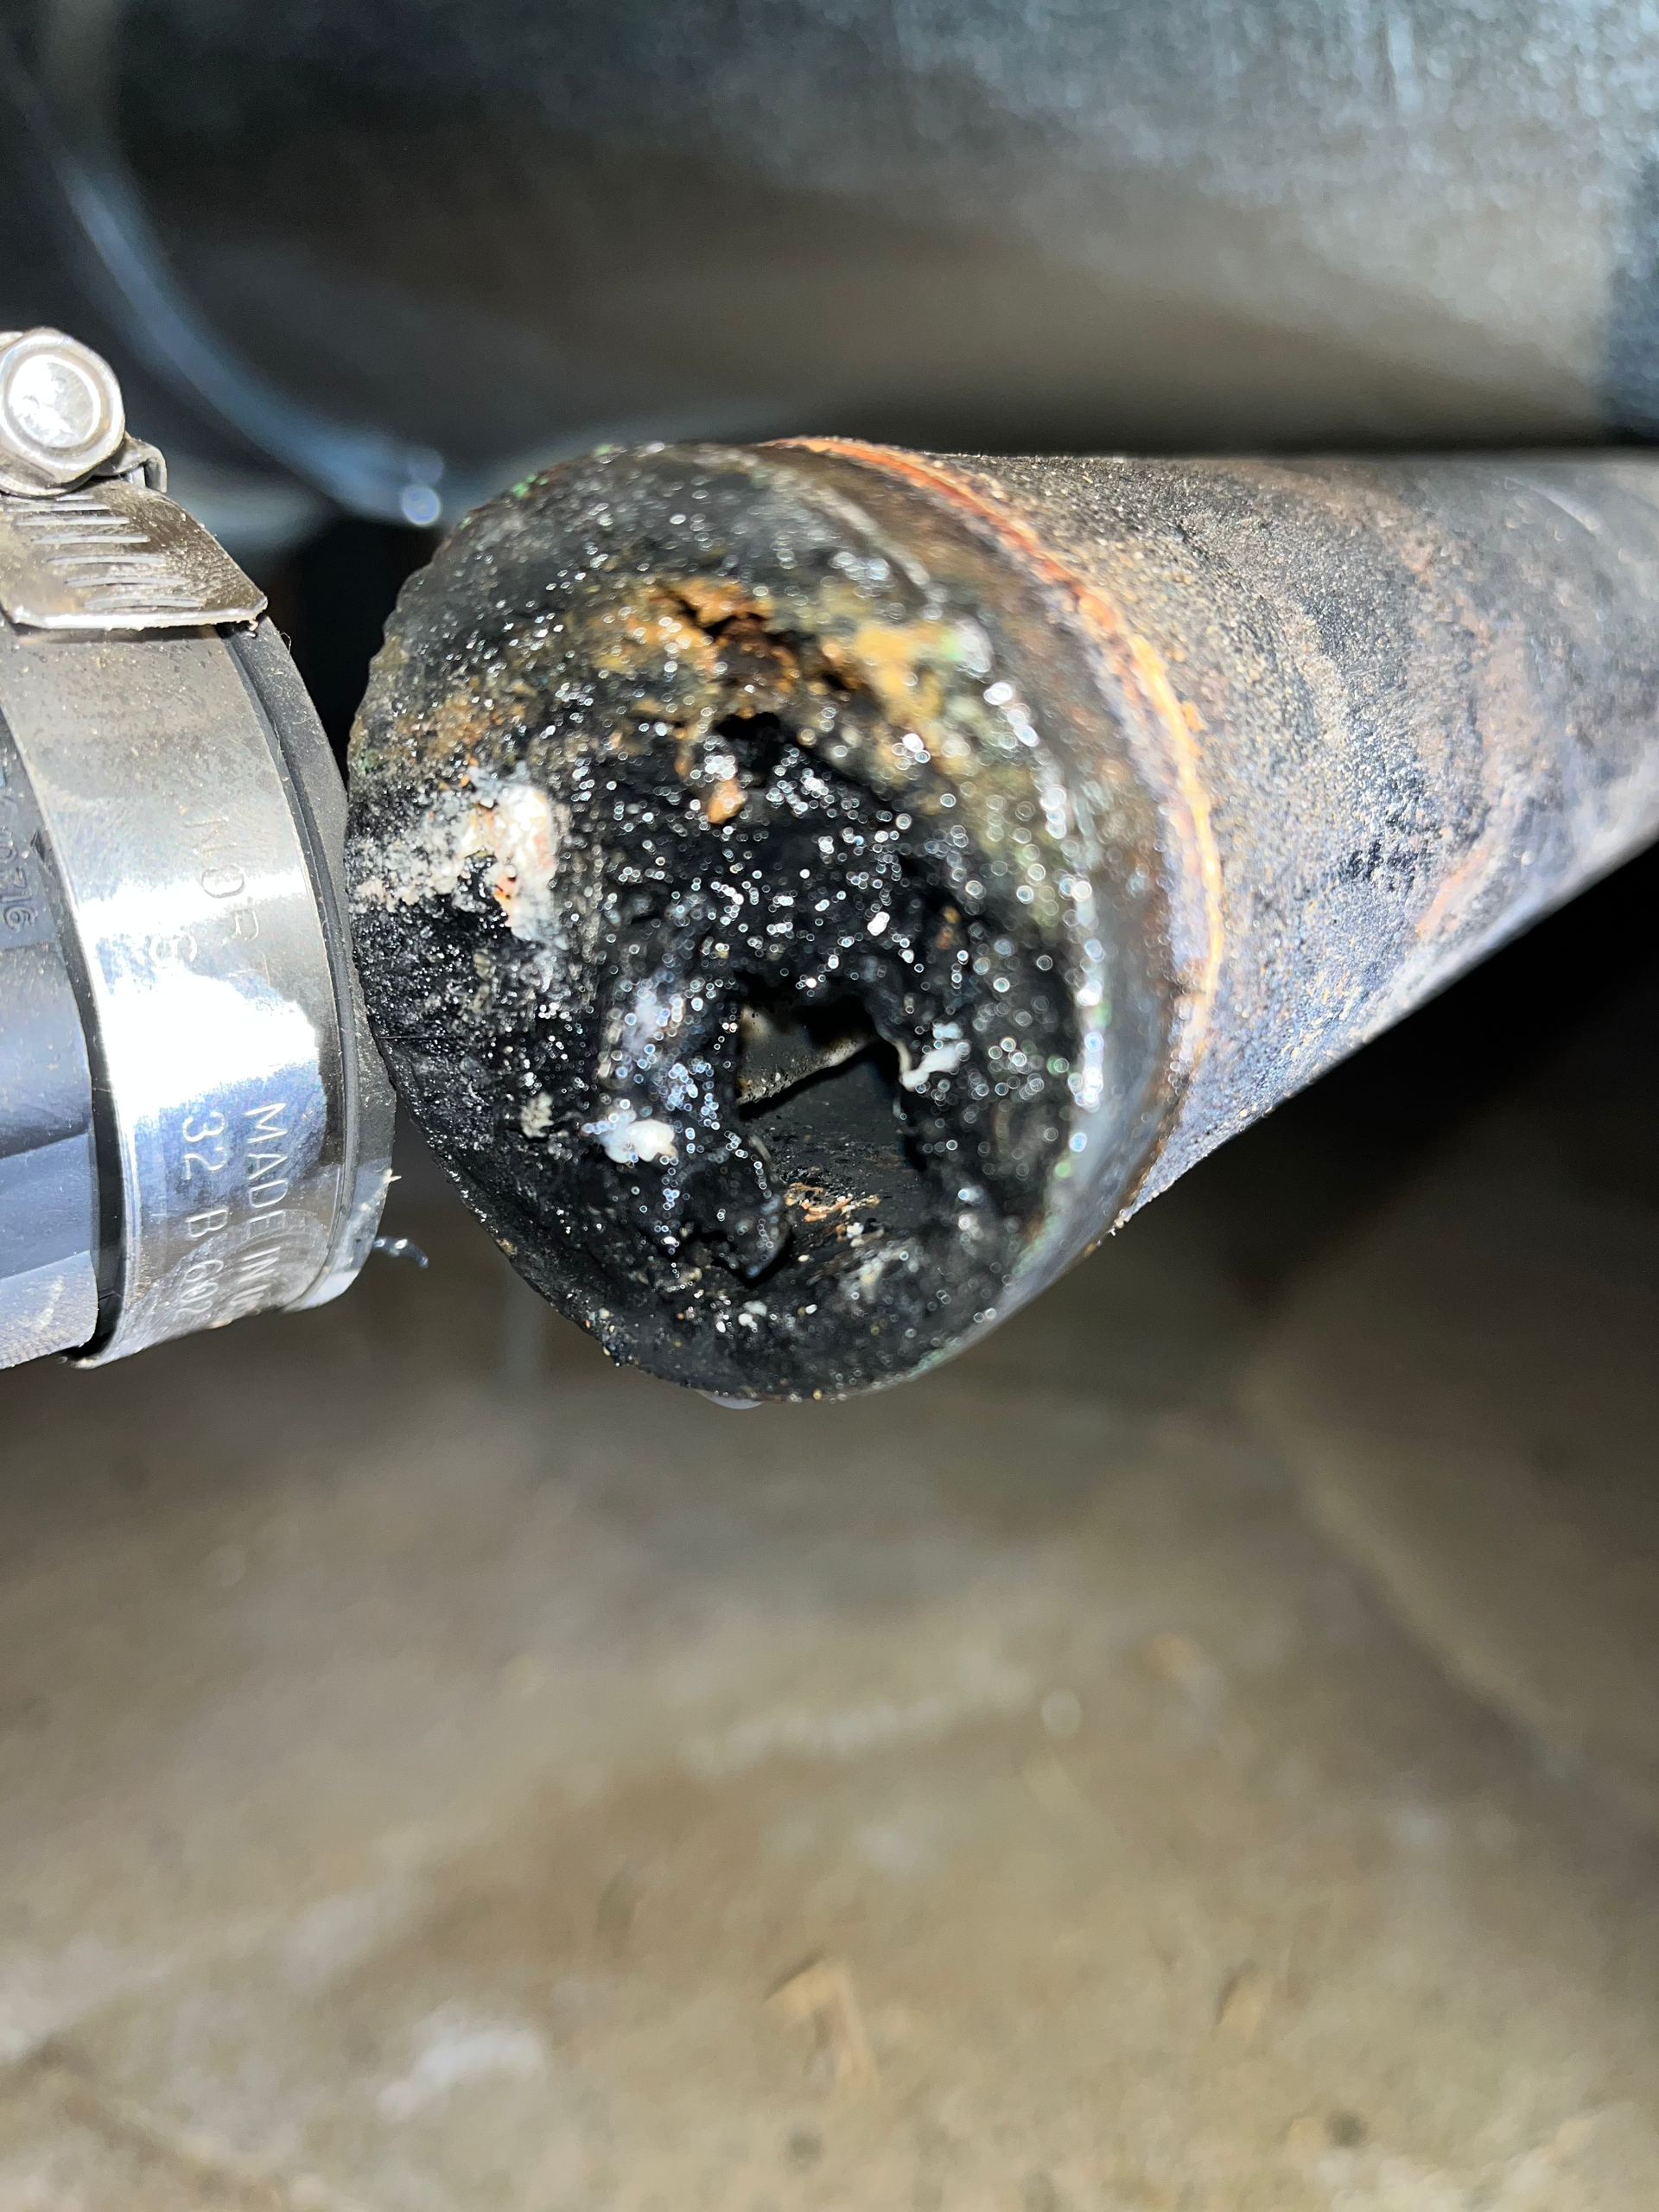 Draincleaning Blocked pipes